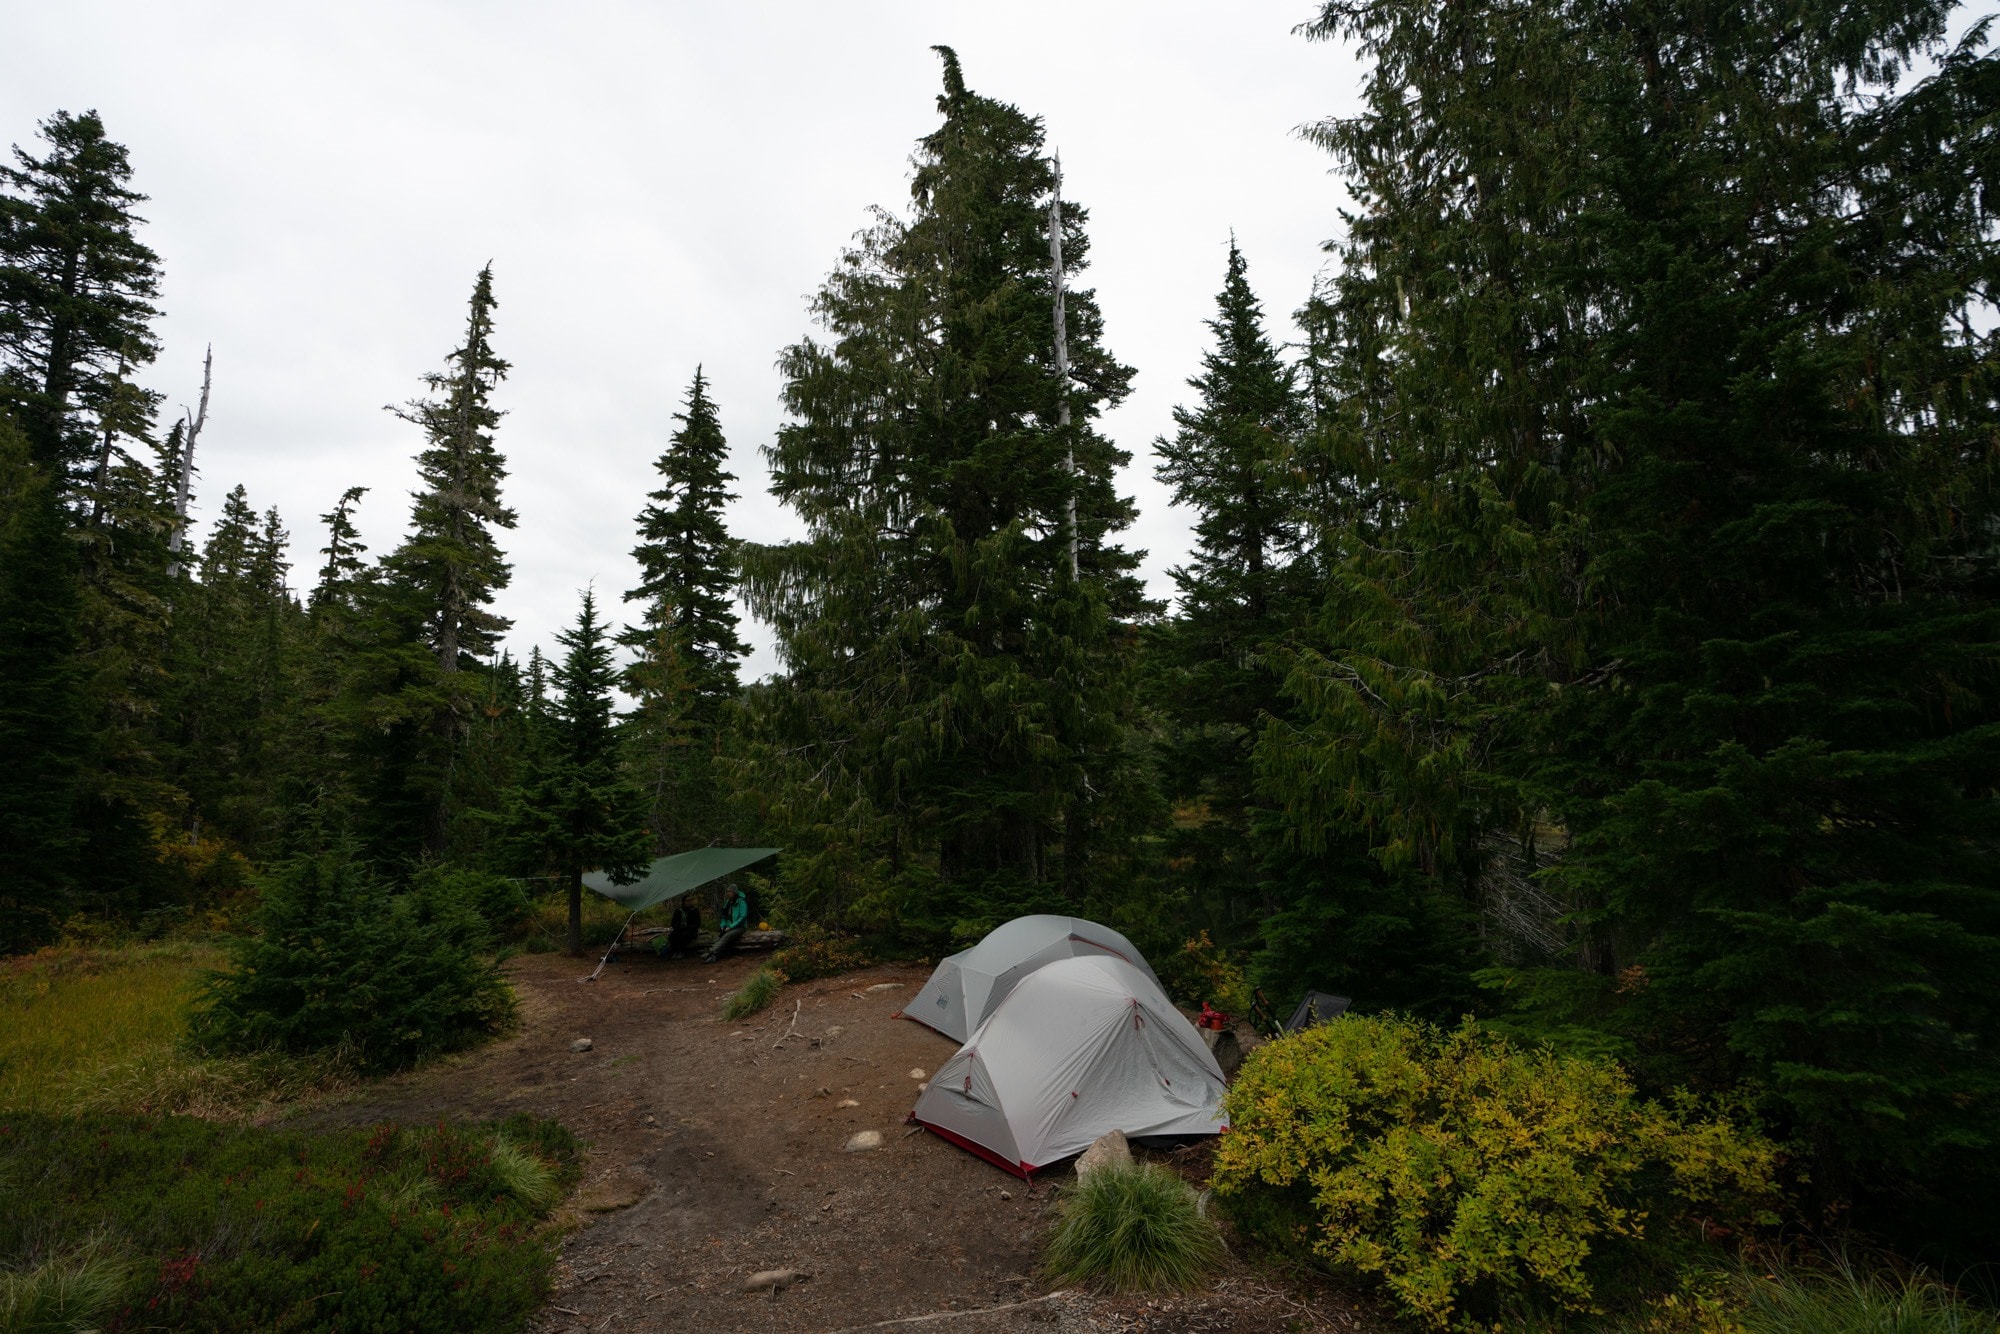 Get my full trail report from backpacking the High Divide Trail in Olympic National Park with REI Adventures, including info on campsites, gear & more.